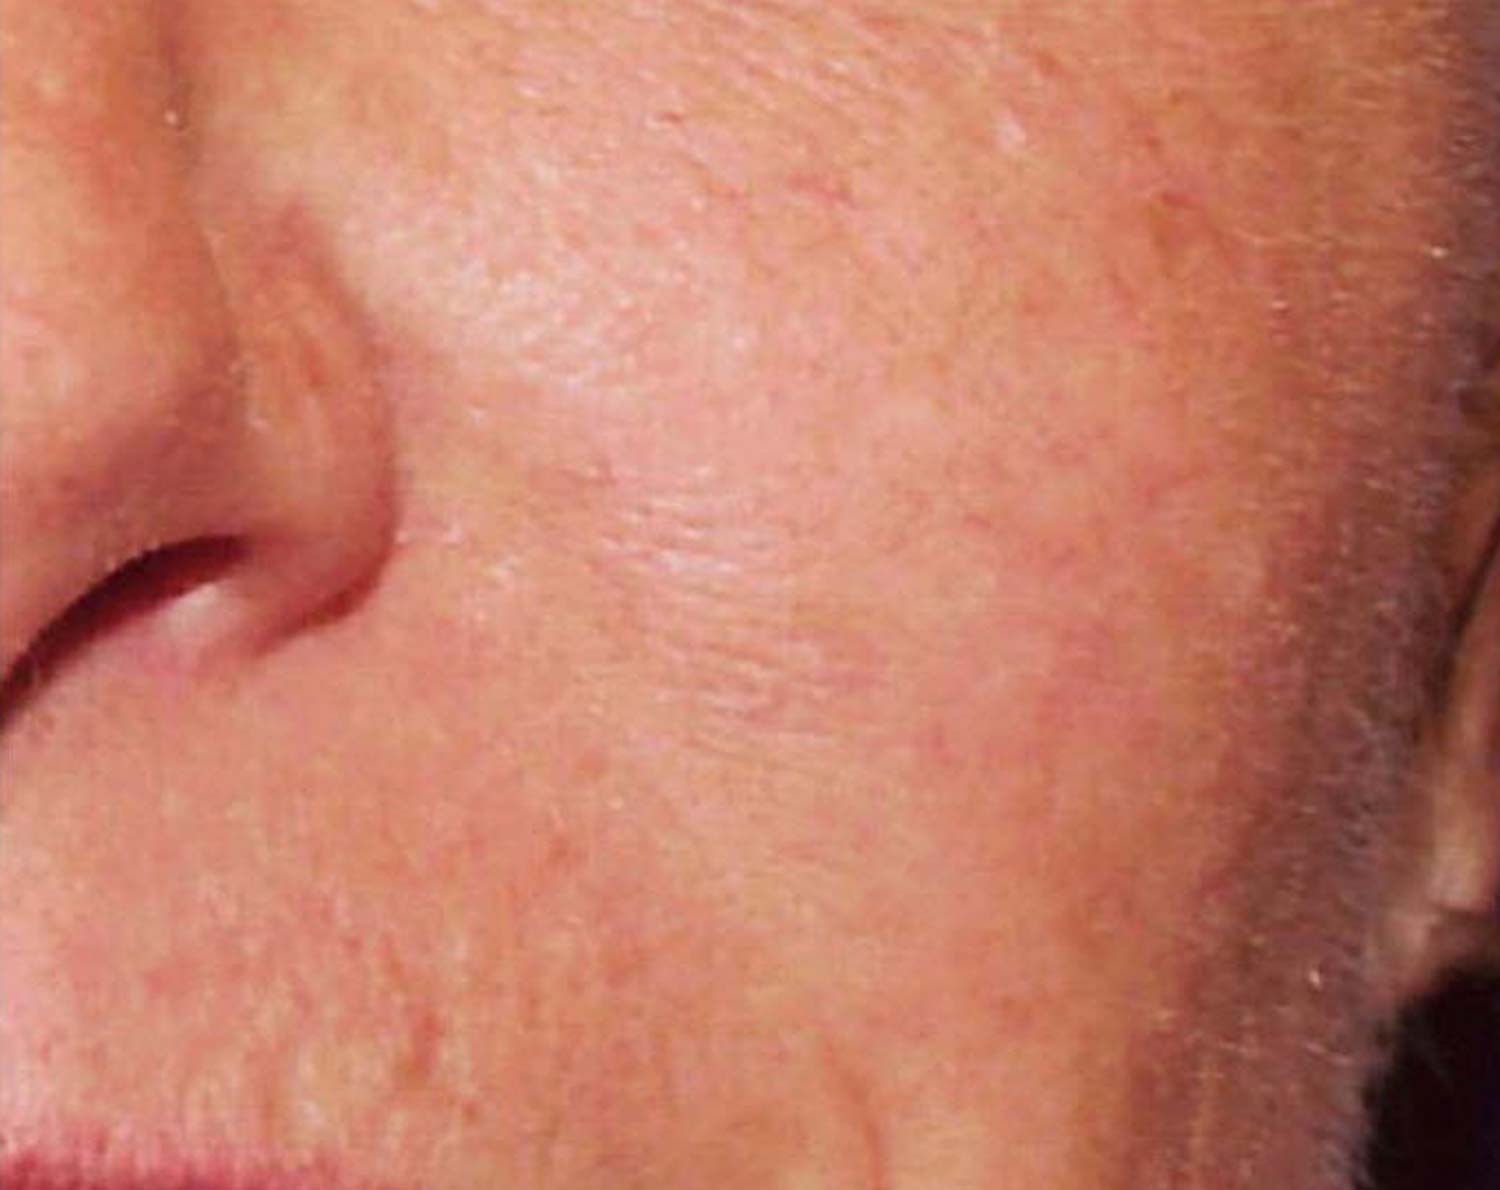 Spider veins on a patients face are completely gone after laser treatment.